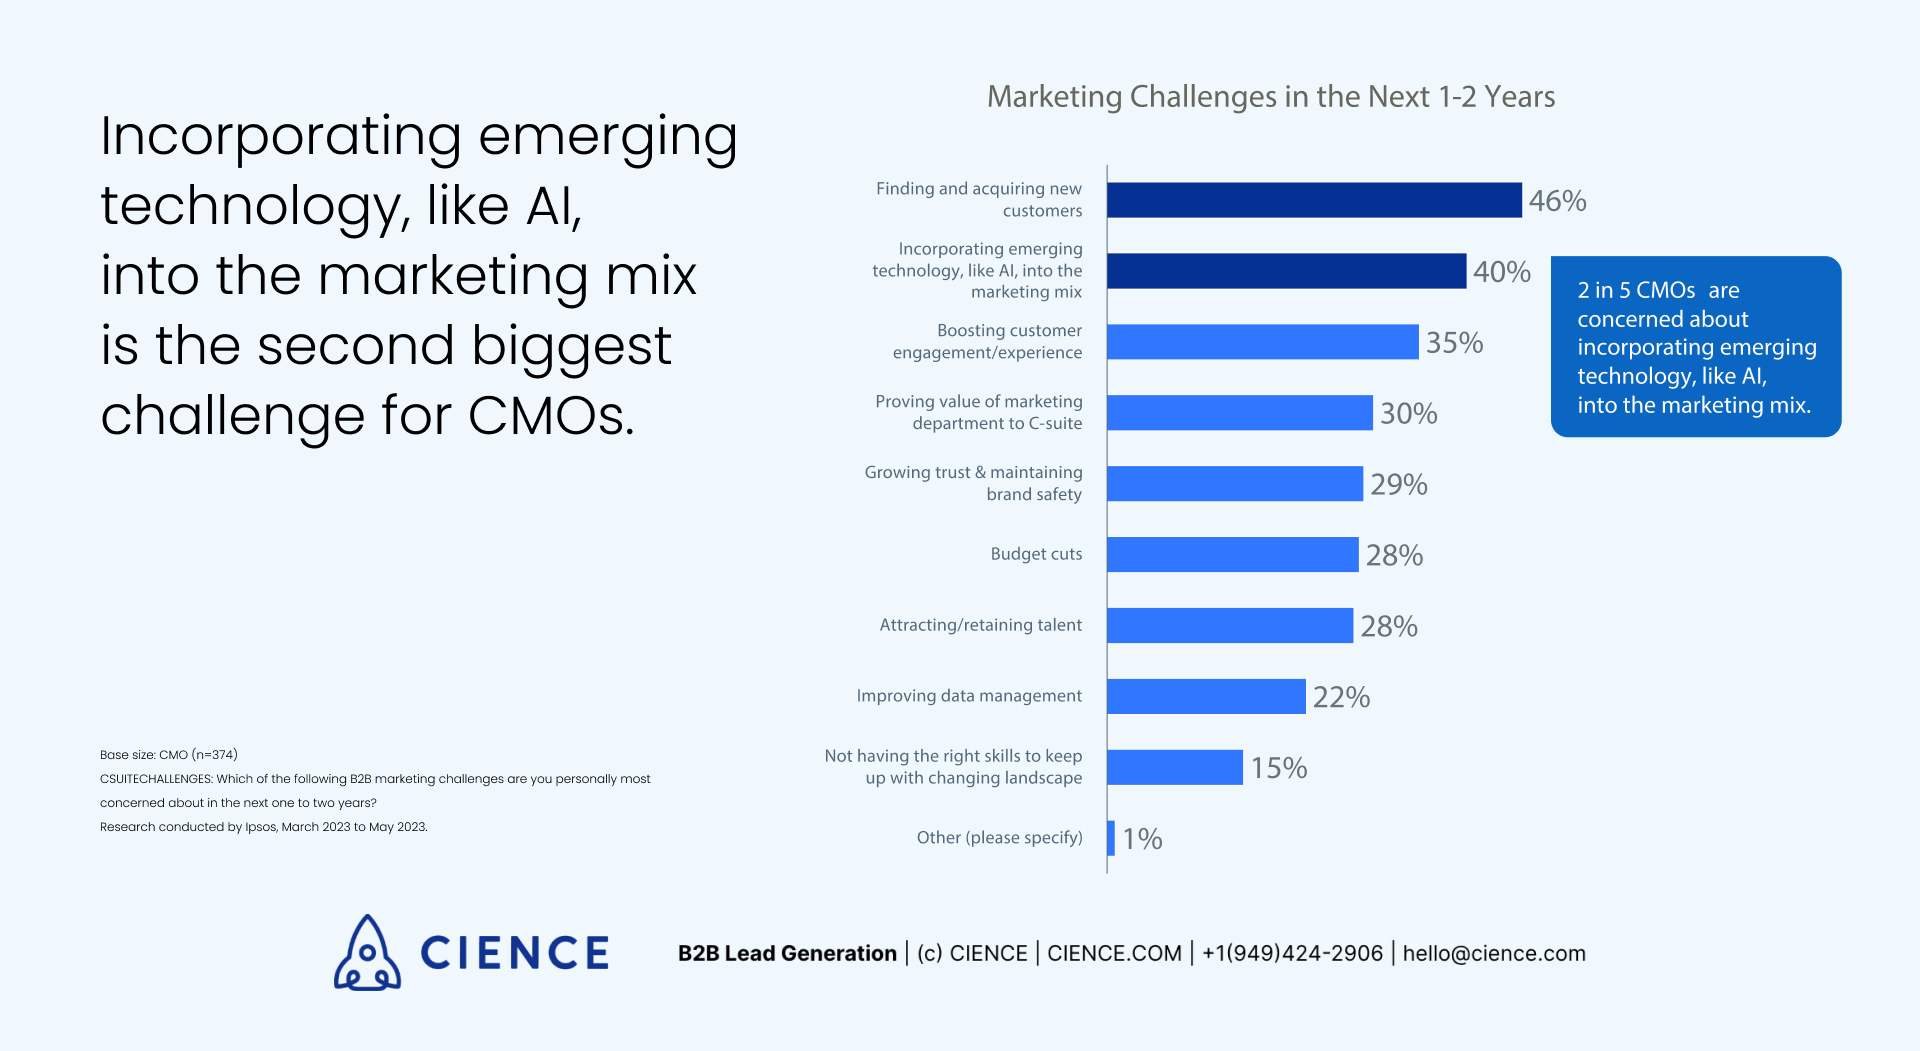 Top Marketing Challenges in the Next 1-2 Years